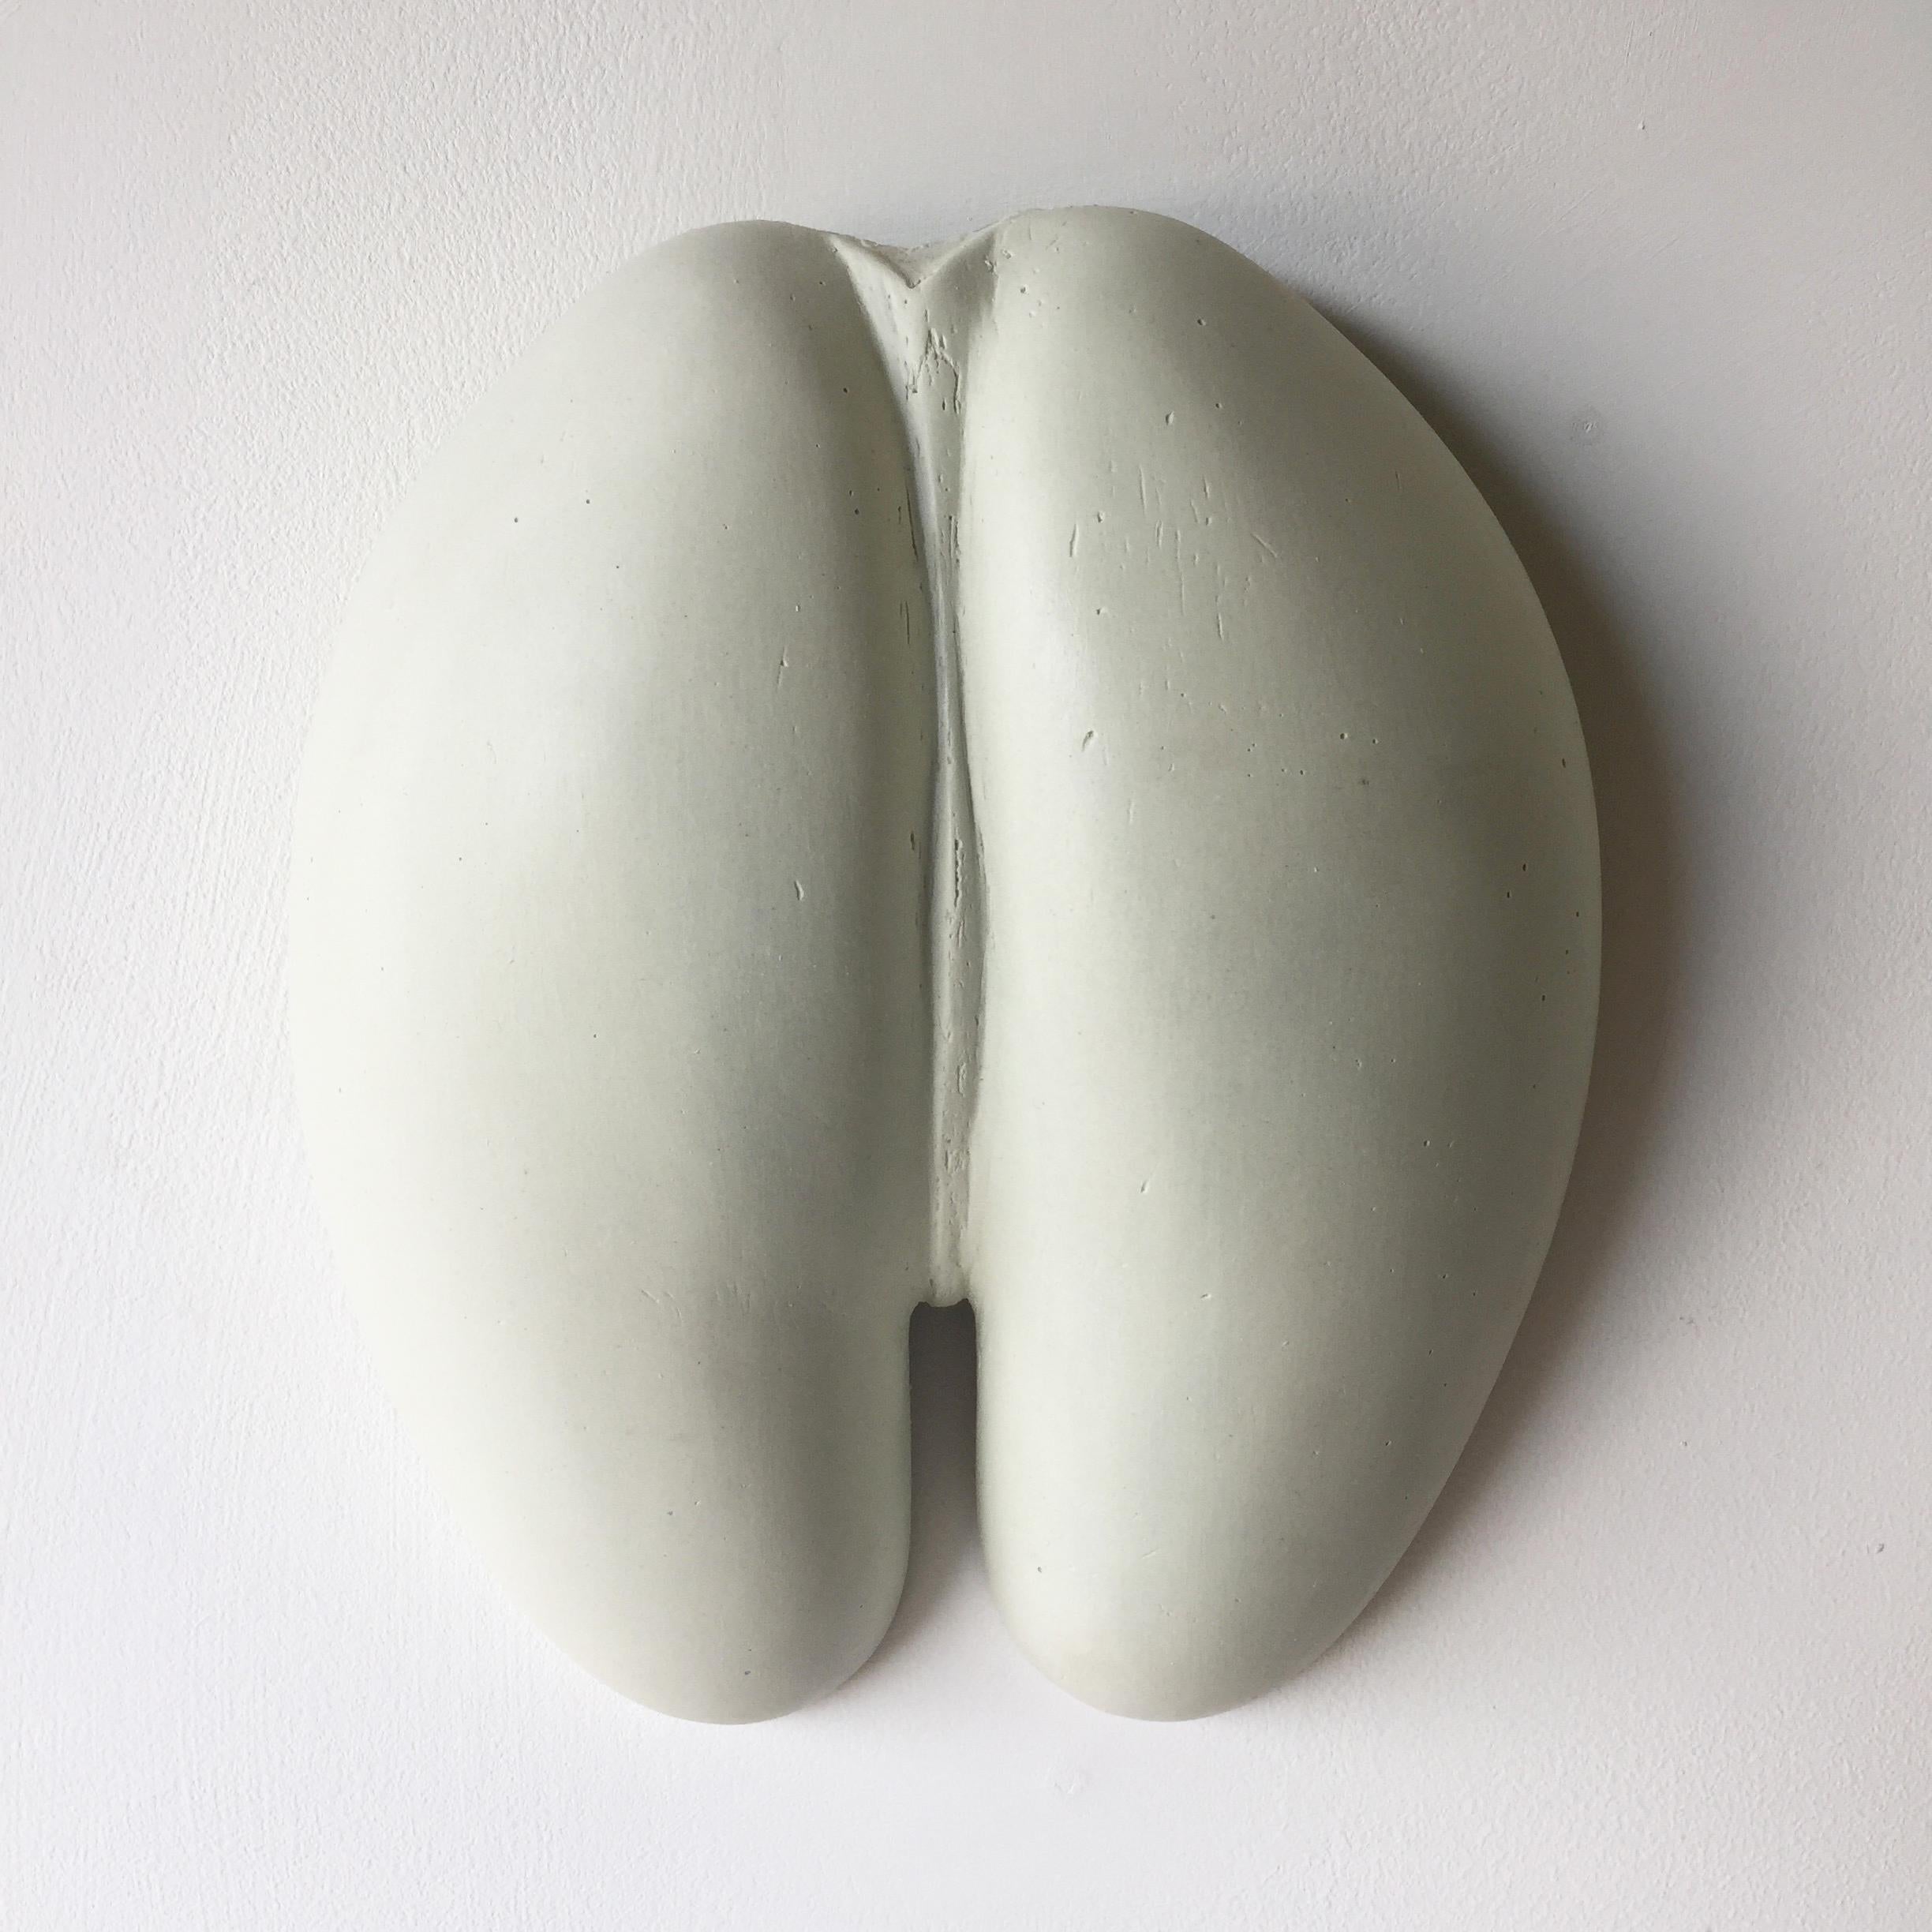 A quirky variation on a classic from the cabinet of curiosities.

Each example is handmade using tinted plaster formed from a silicone mould. The mould itself was taken from a near perfectly symmetrical natural example.

These 3 dimensional wall